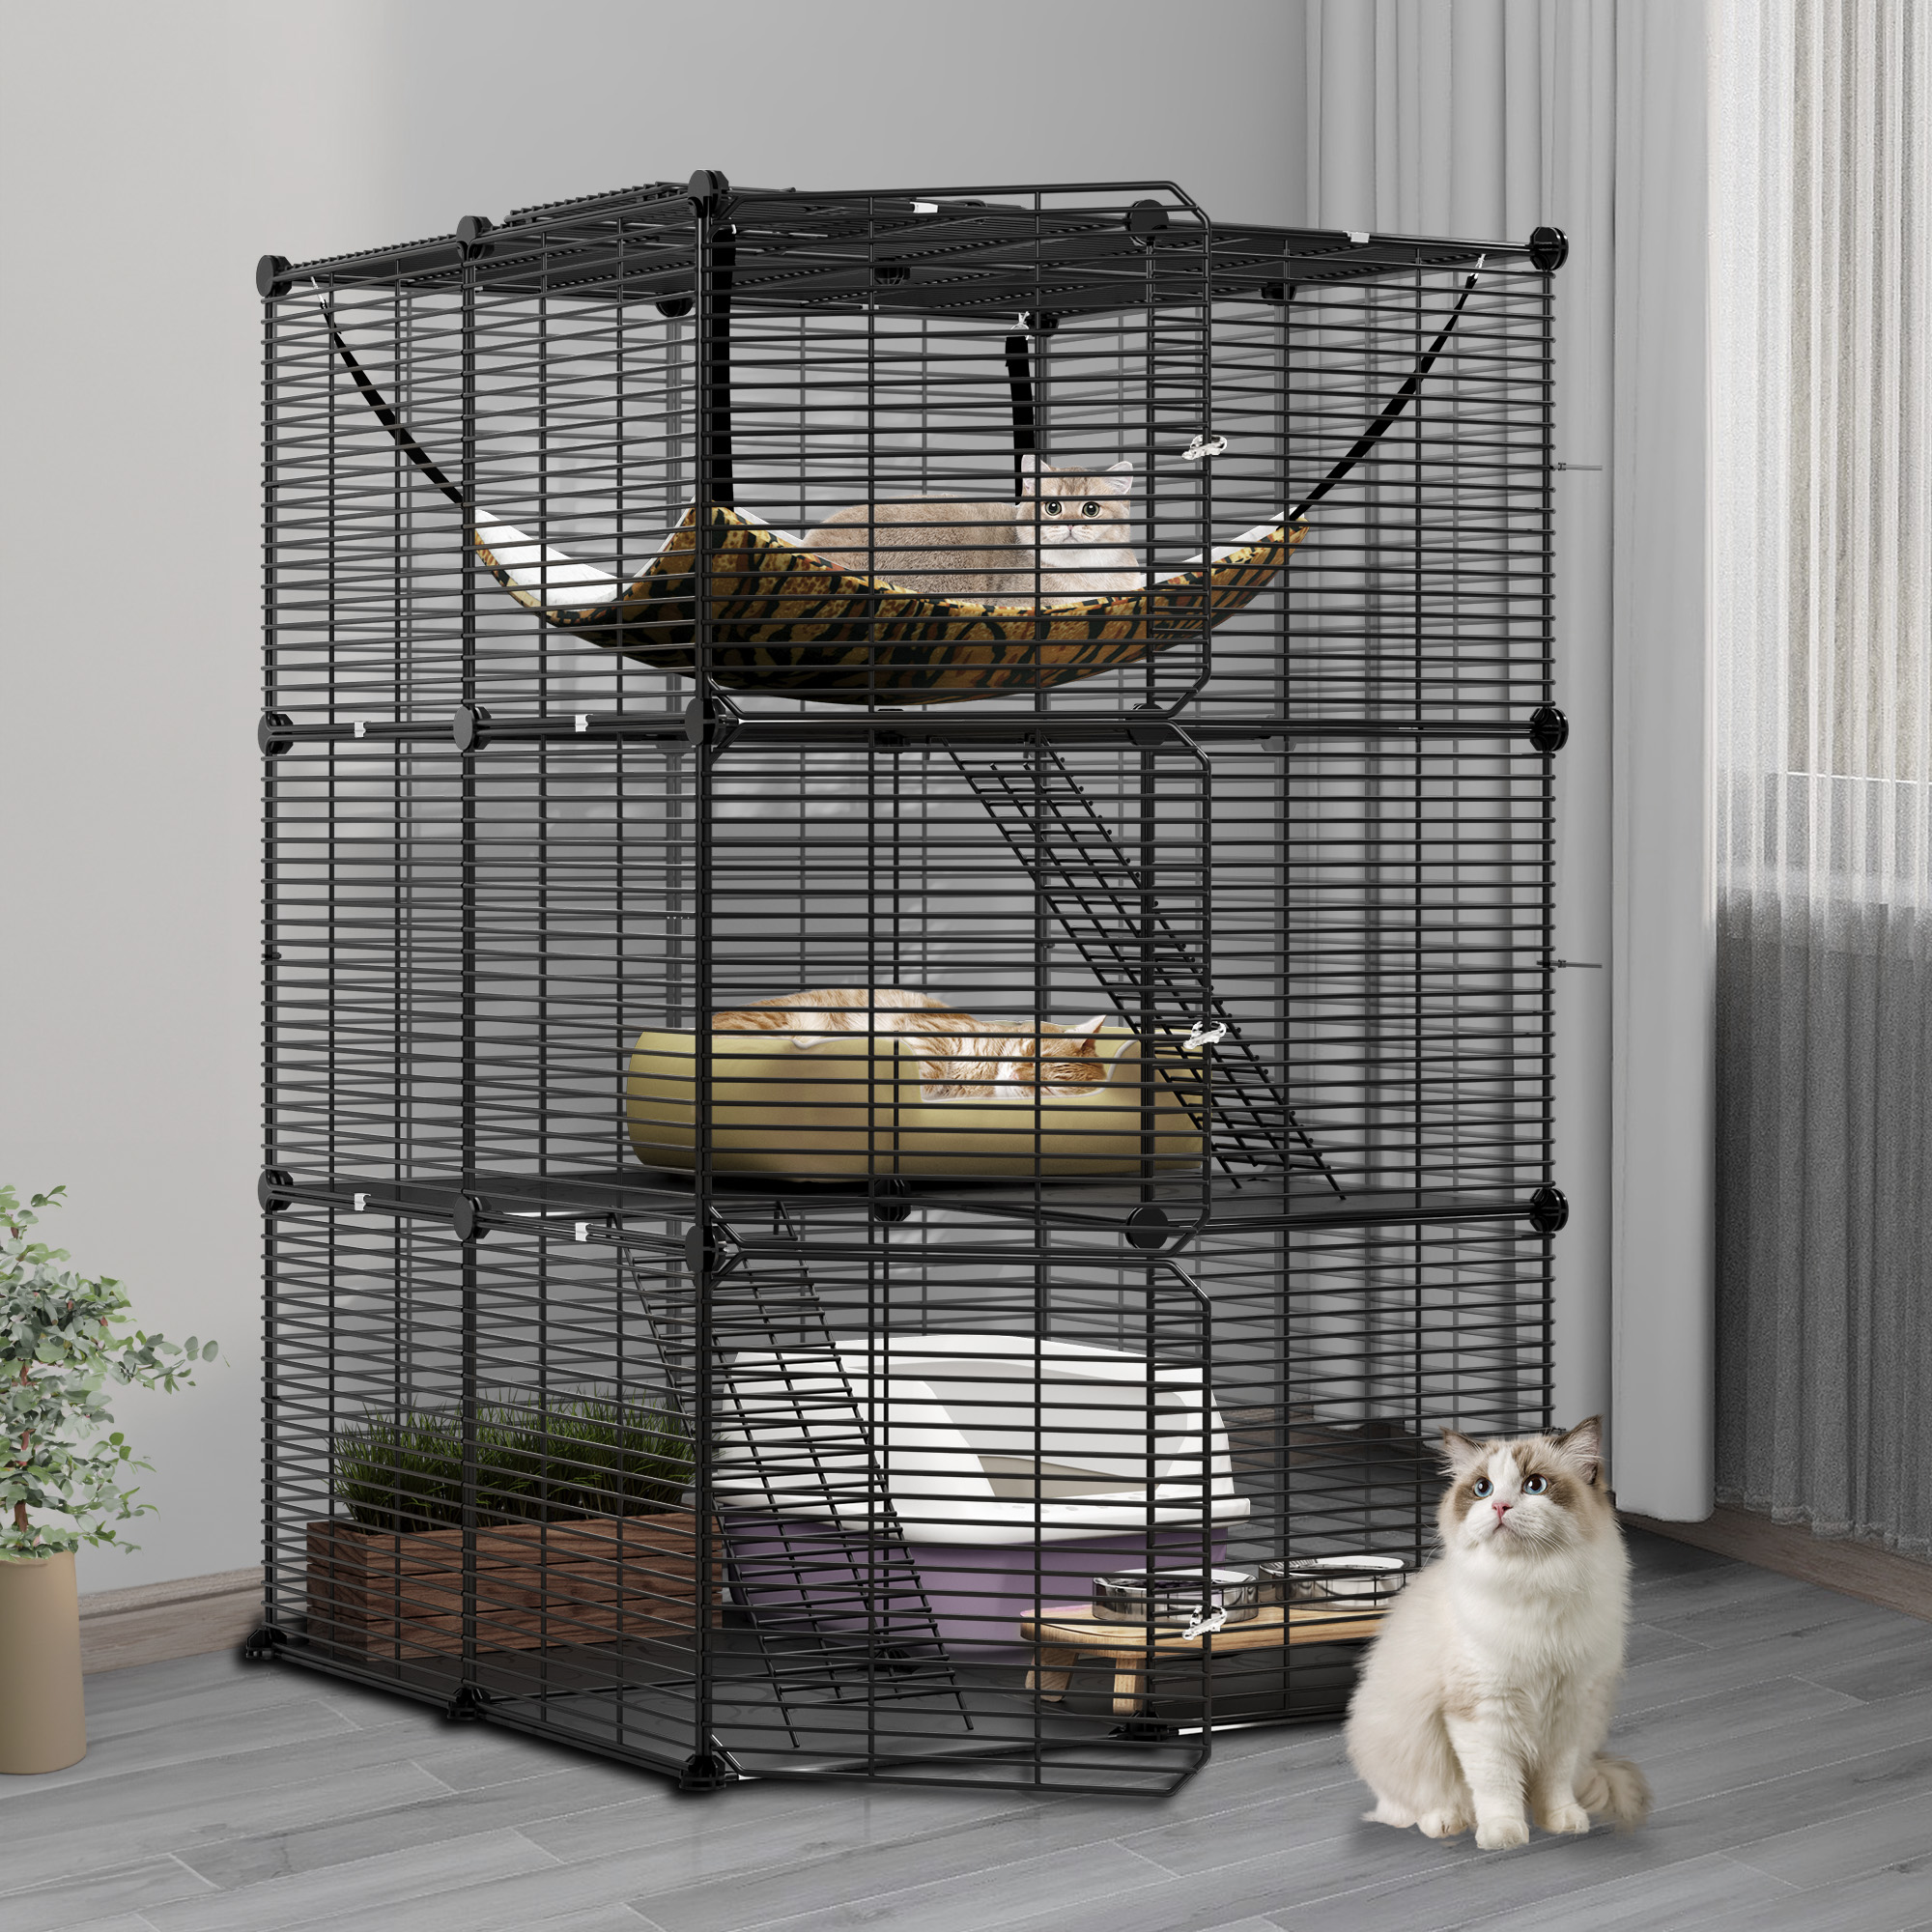 Dextrus Indoor Cat Cage with Extra Large Hammock for 1-2 Cats - DIY Cat Enclosure with Extra Large Hammock for Multiple Small Animals Cats, Ferret, Chinchilla, Rabbit,(28"L x 28"W x 41"H,Black) - image 1 of 5